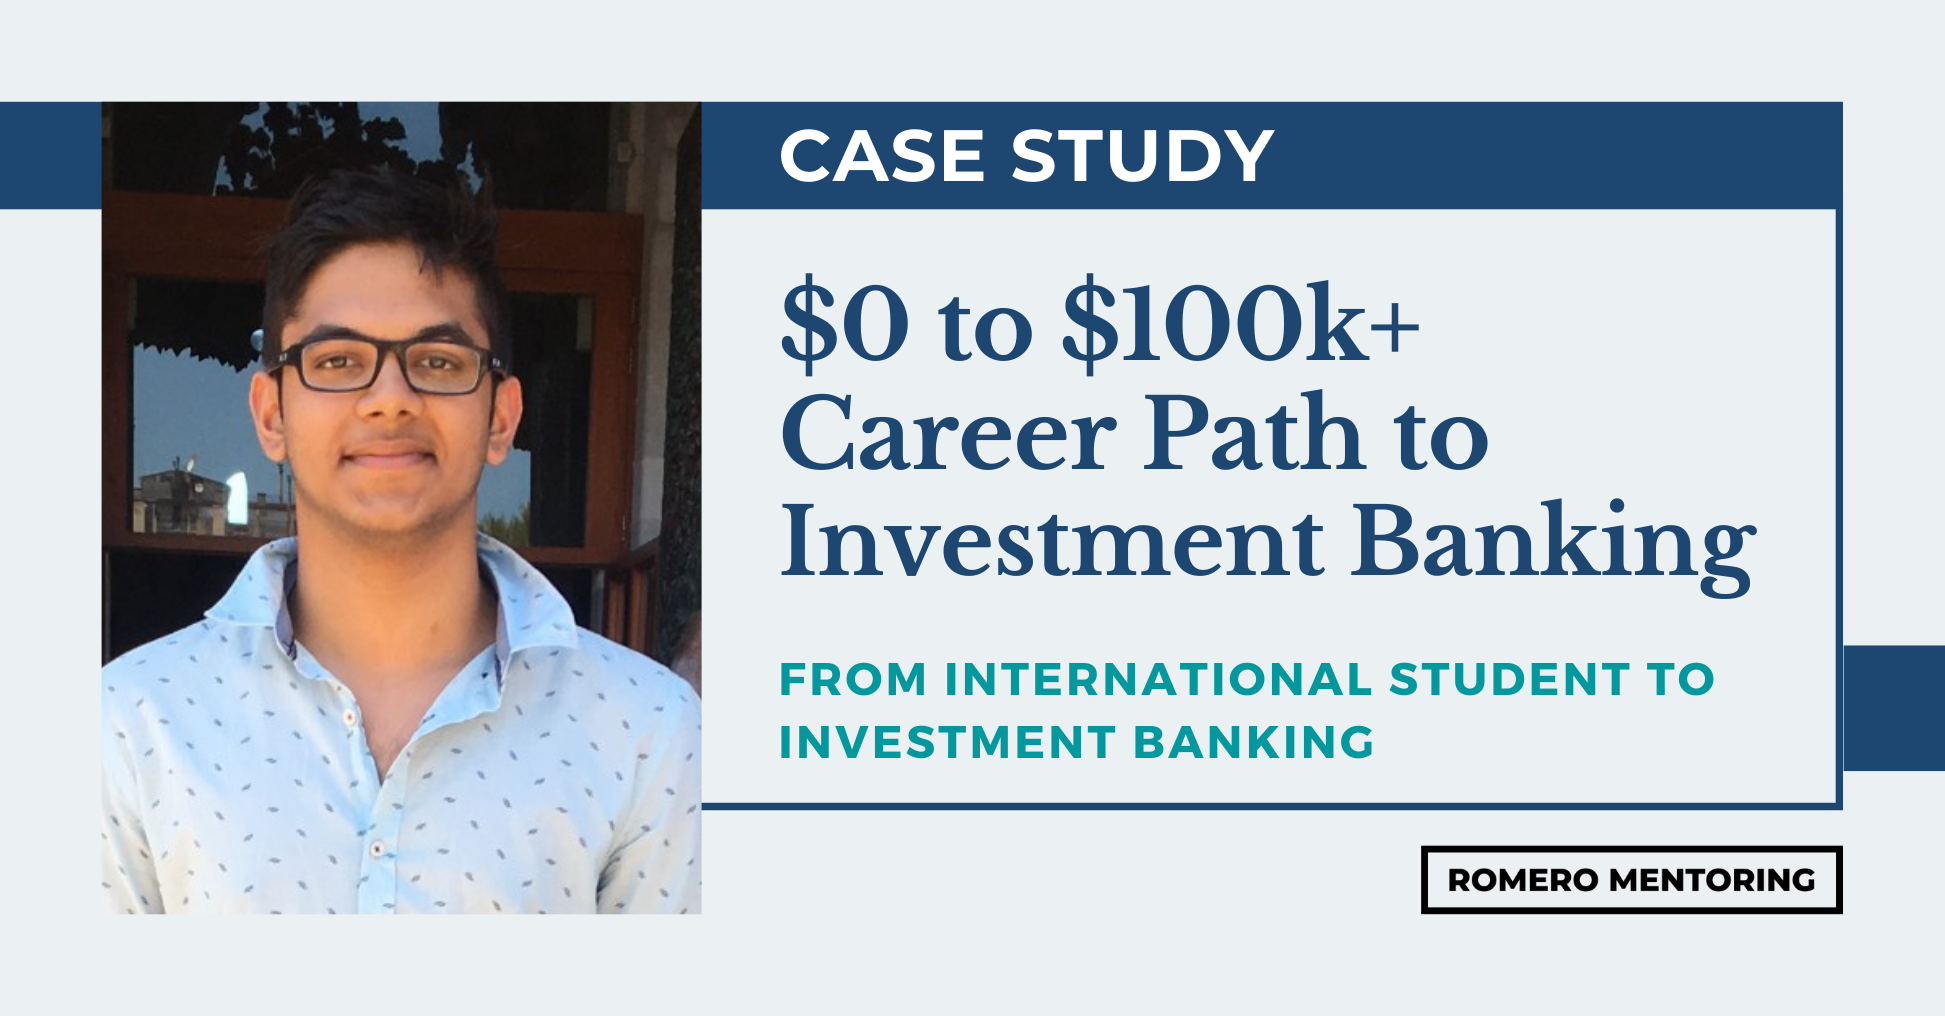 APP Student Goes From $0 to $100k+ Salary; Career Path to Investment Banking